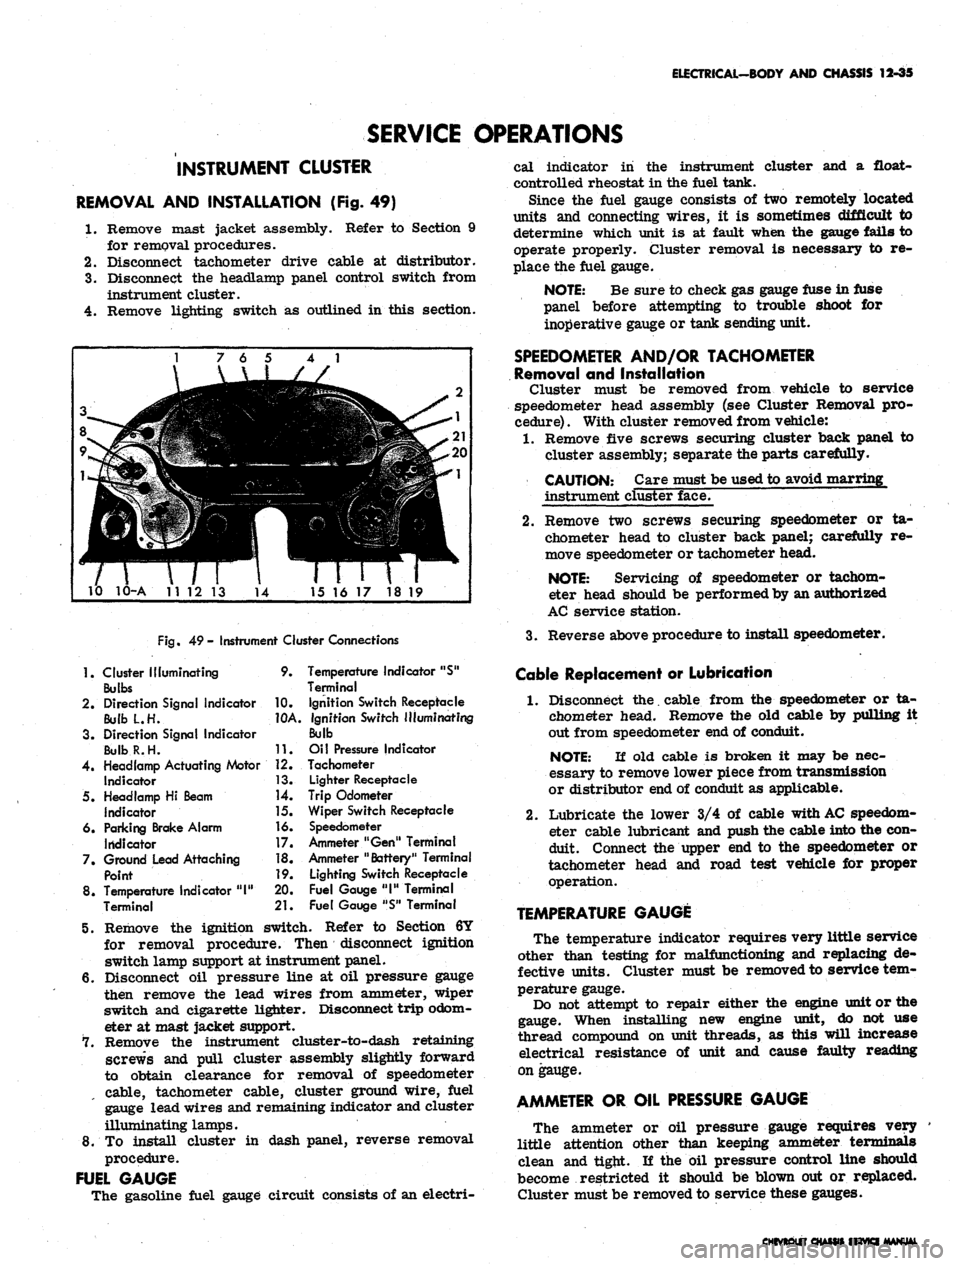 CHEVROLET CAMARO 1967 1.G Chassis Workshop Manual 
ELECTRICAL-BODY AND CHASSIS 12-35

SERVICE OPERATIONS

INSTRUMENT CLUSTER

REMOVAL AND INSTALLATION (Fig. 49)

1.
 Remove mast jacket assembly. Refer to Section 9

for removal procedures.

2.
 Discon